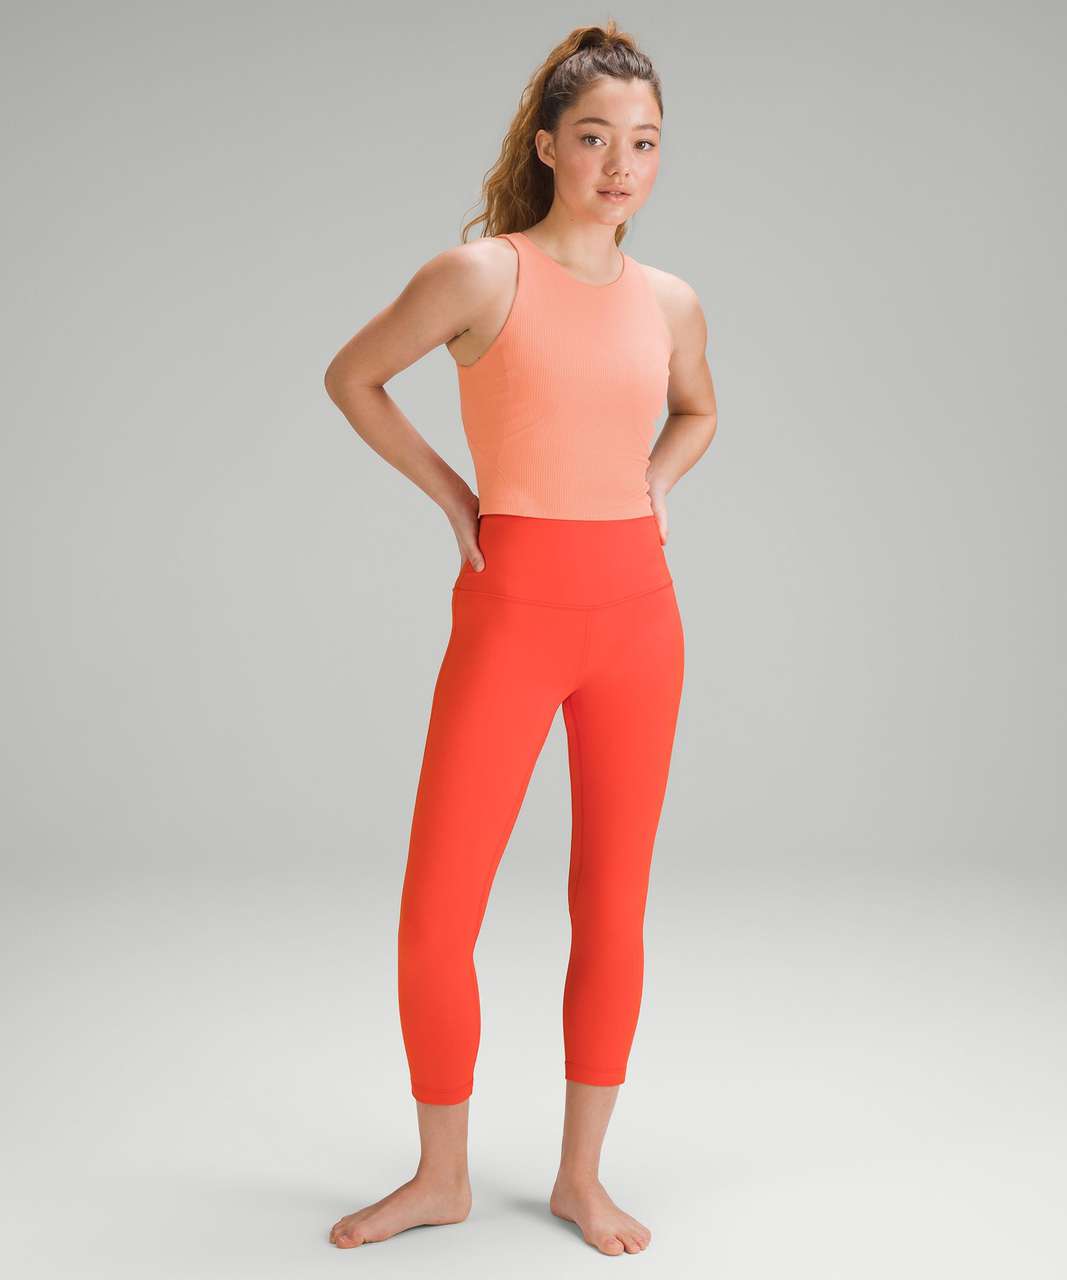 NWT Lululemon Align Tank size 4 rustic coral ☆AUTHENTIC☆ RARE